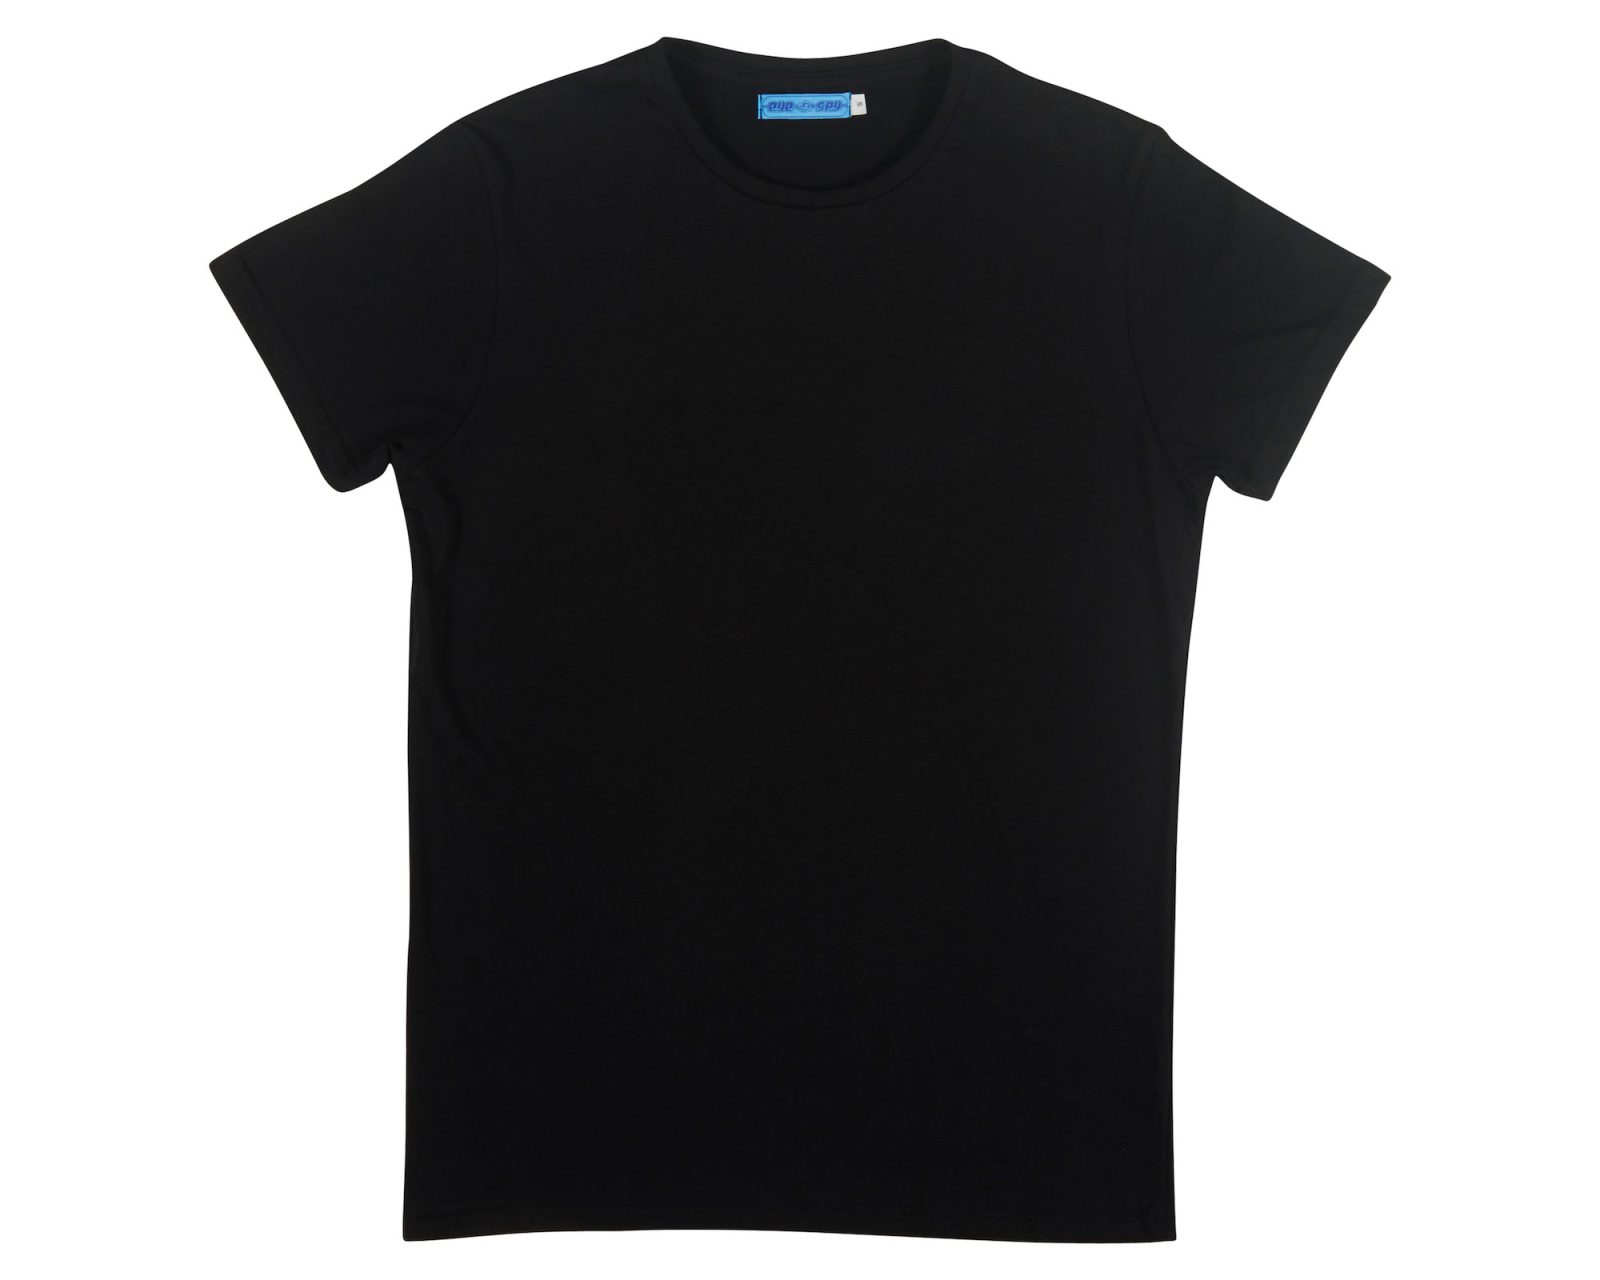 Qualitops Mens Semi Fitted Short Sleeve Tee Australian made